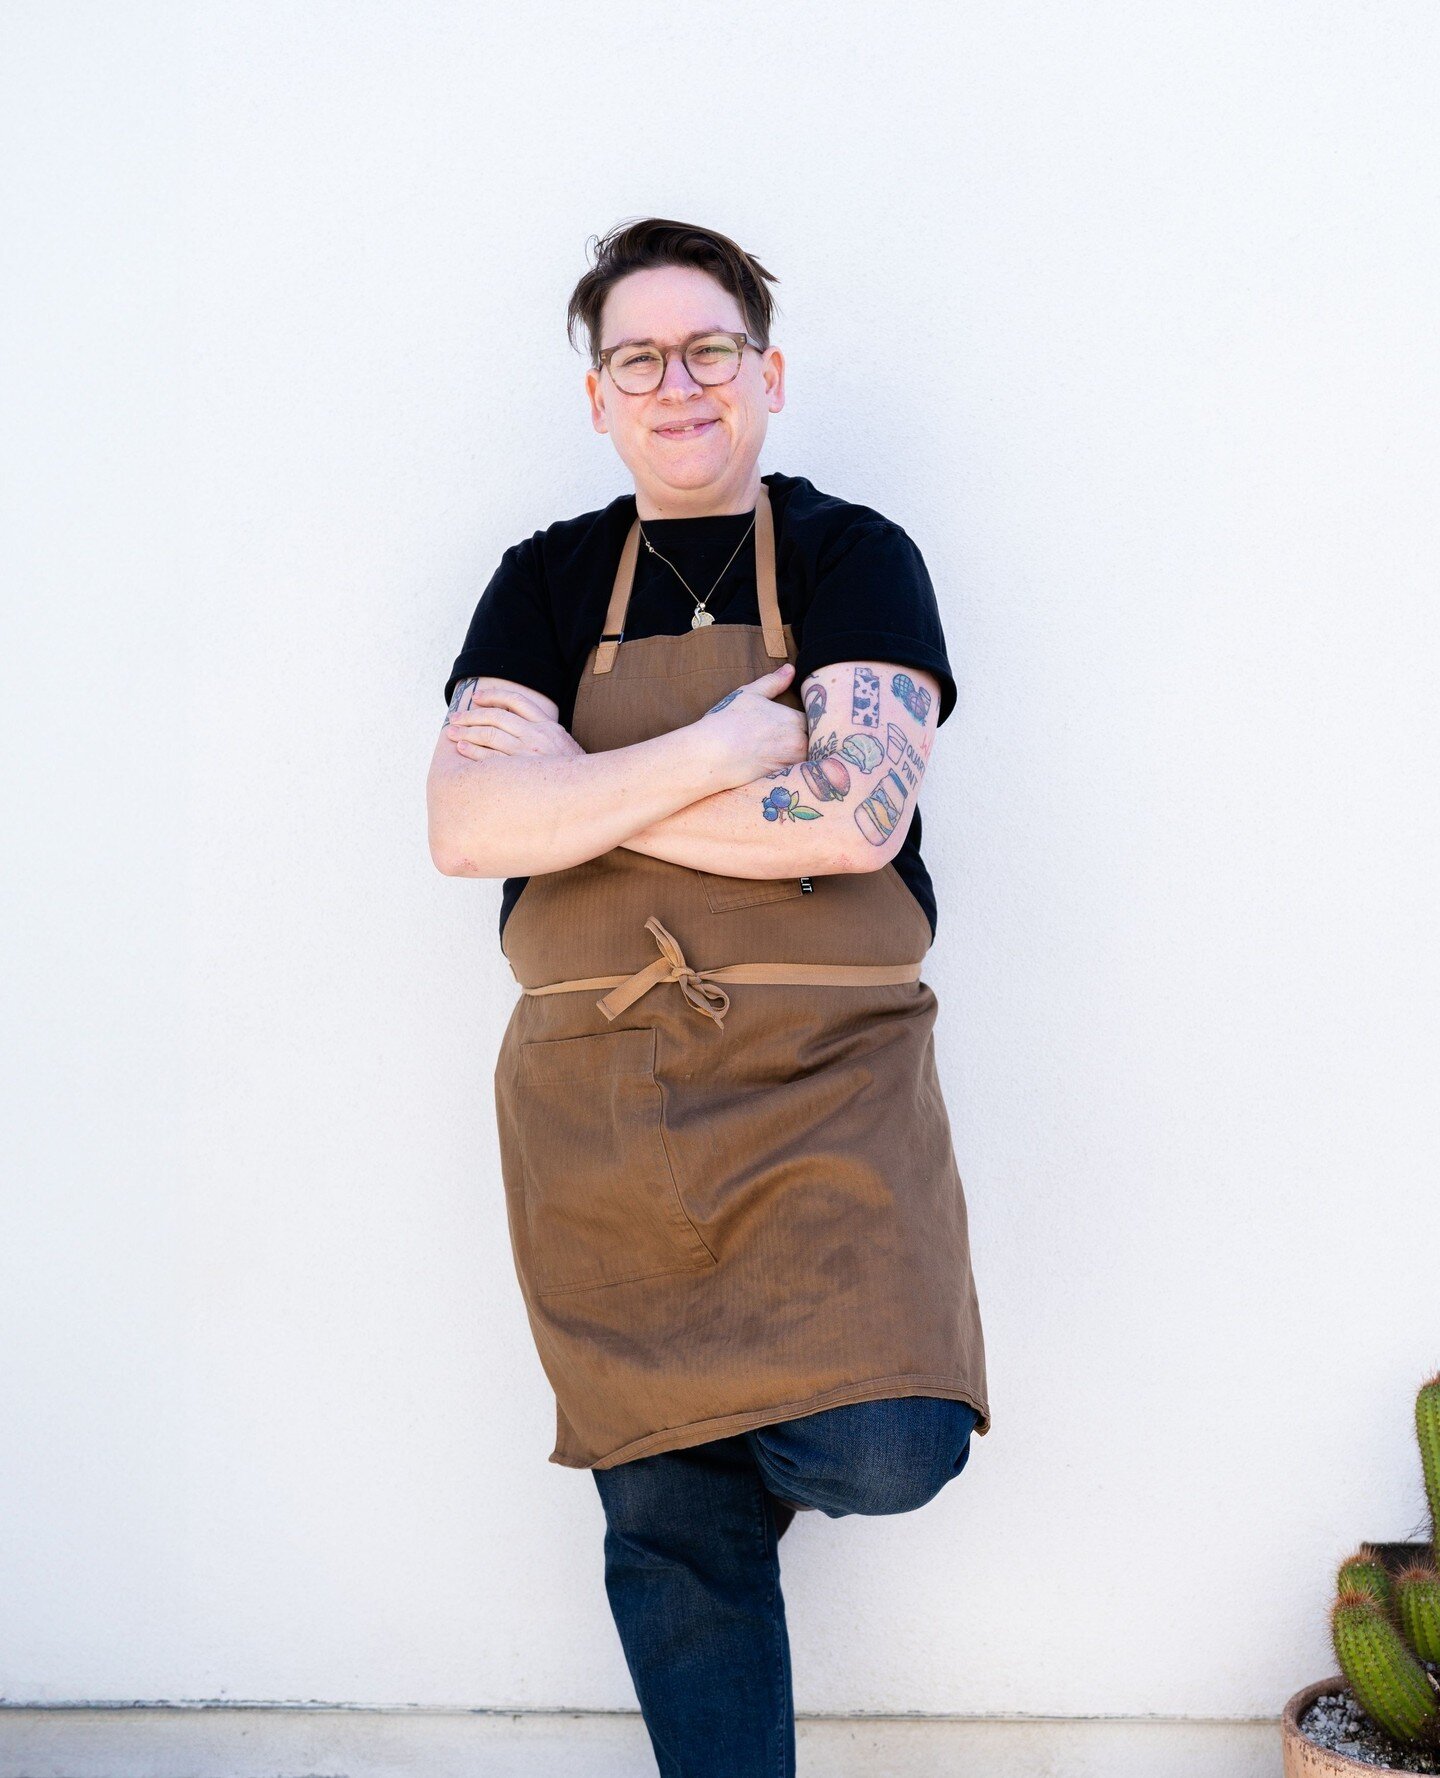 Meet Chef @chefcatierandazzo, a celebrated chef hailing from Columbus, OH, who is brimming with food history knowledge, quick wit, and delicious twists on classic American dishes. A non-binary chef, Catie is committed to being a voice for queer and t